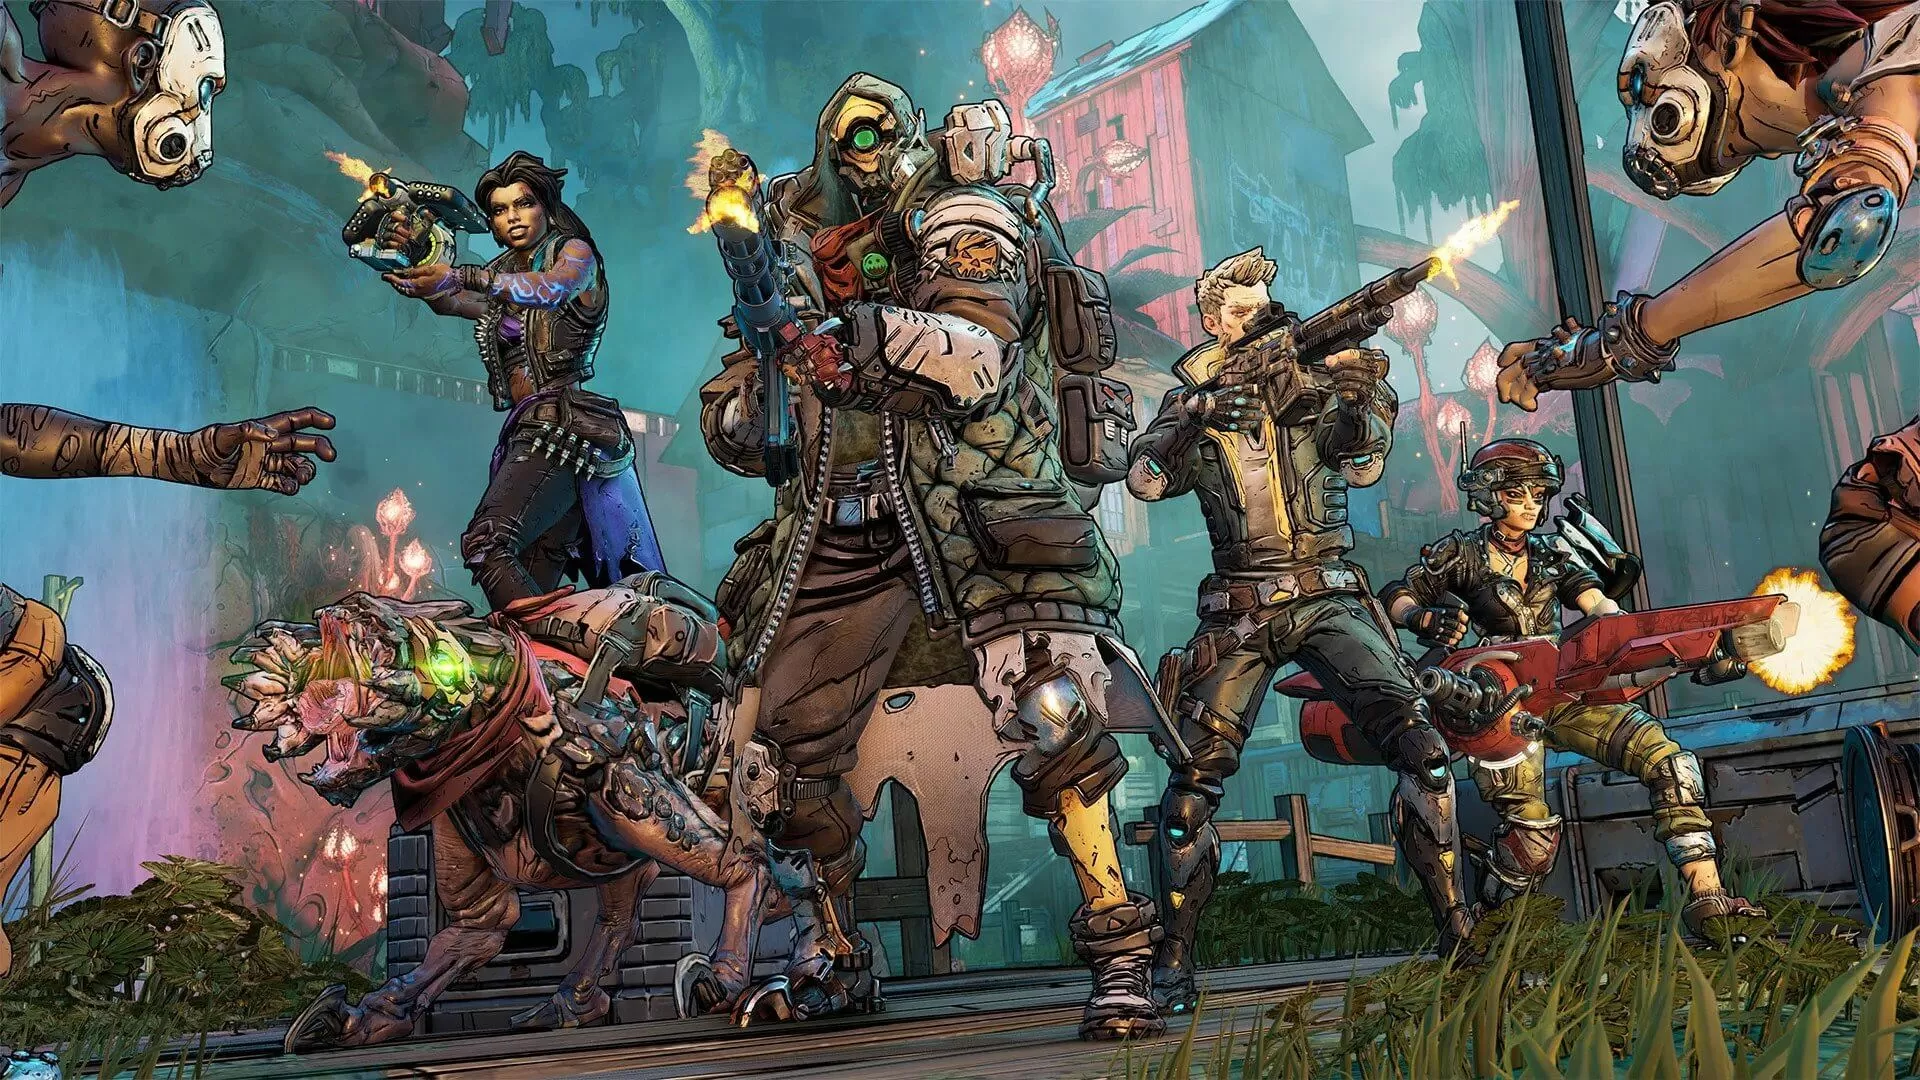 Borderlands 3 is currently free to download and keep on PC | TechSpot